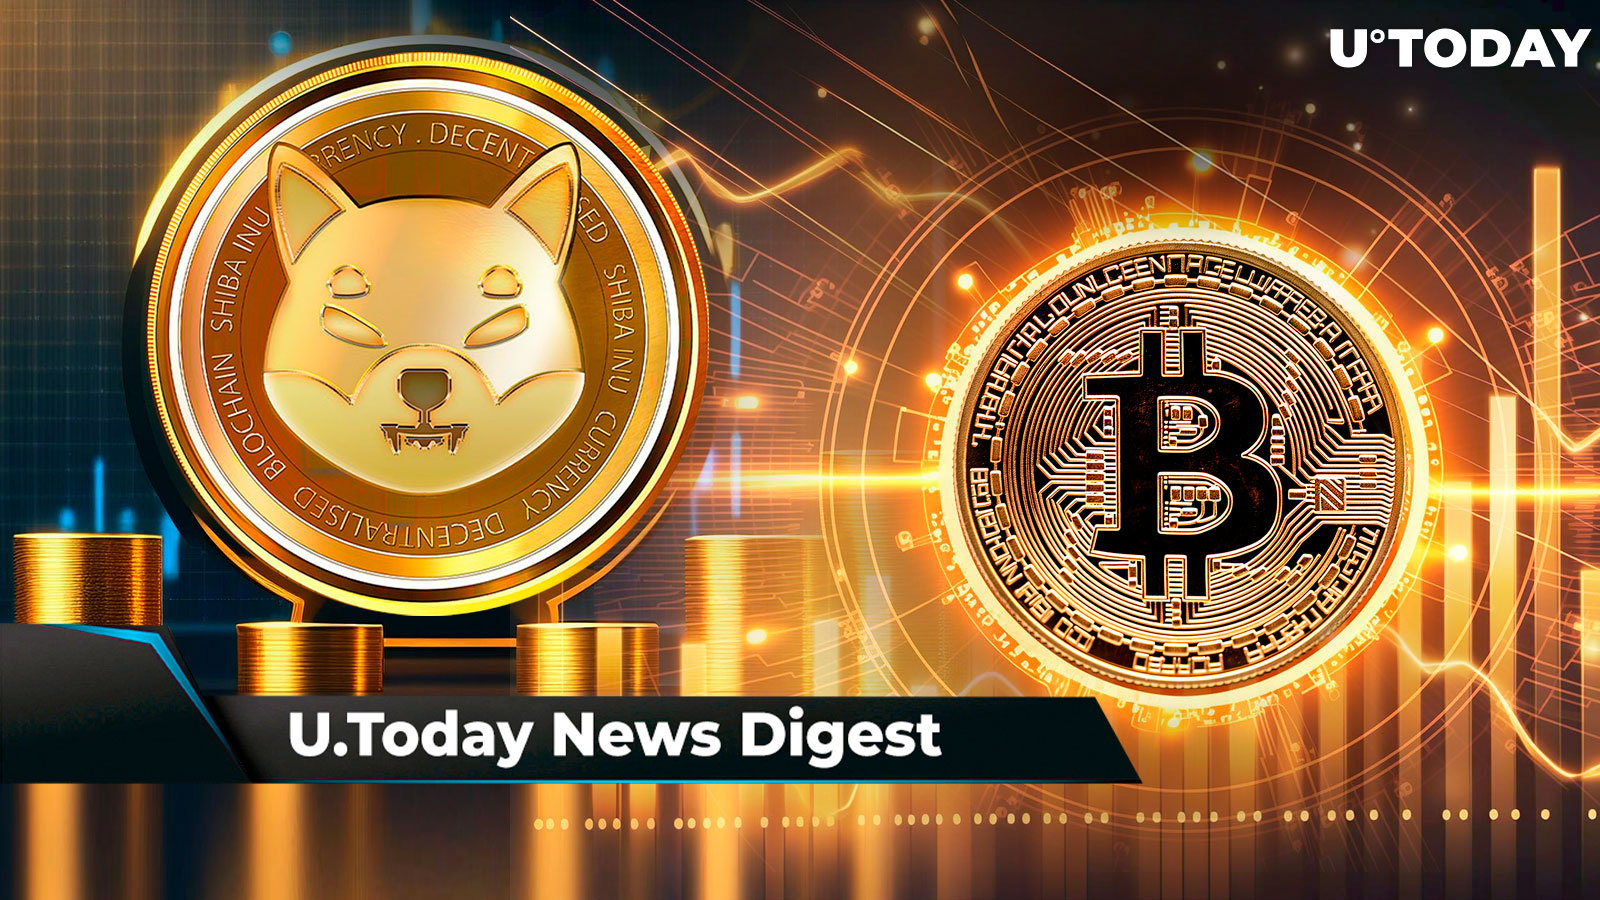 SHIB on Course to Erase Another Zero, Bitcoin Forms Golden Cross, Shytoshi Kusama Sends This Cryptic Message to SHIB Army: Crypto News Digest by U.Today